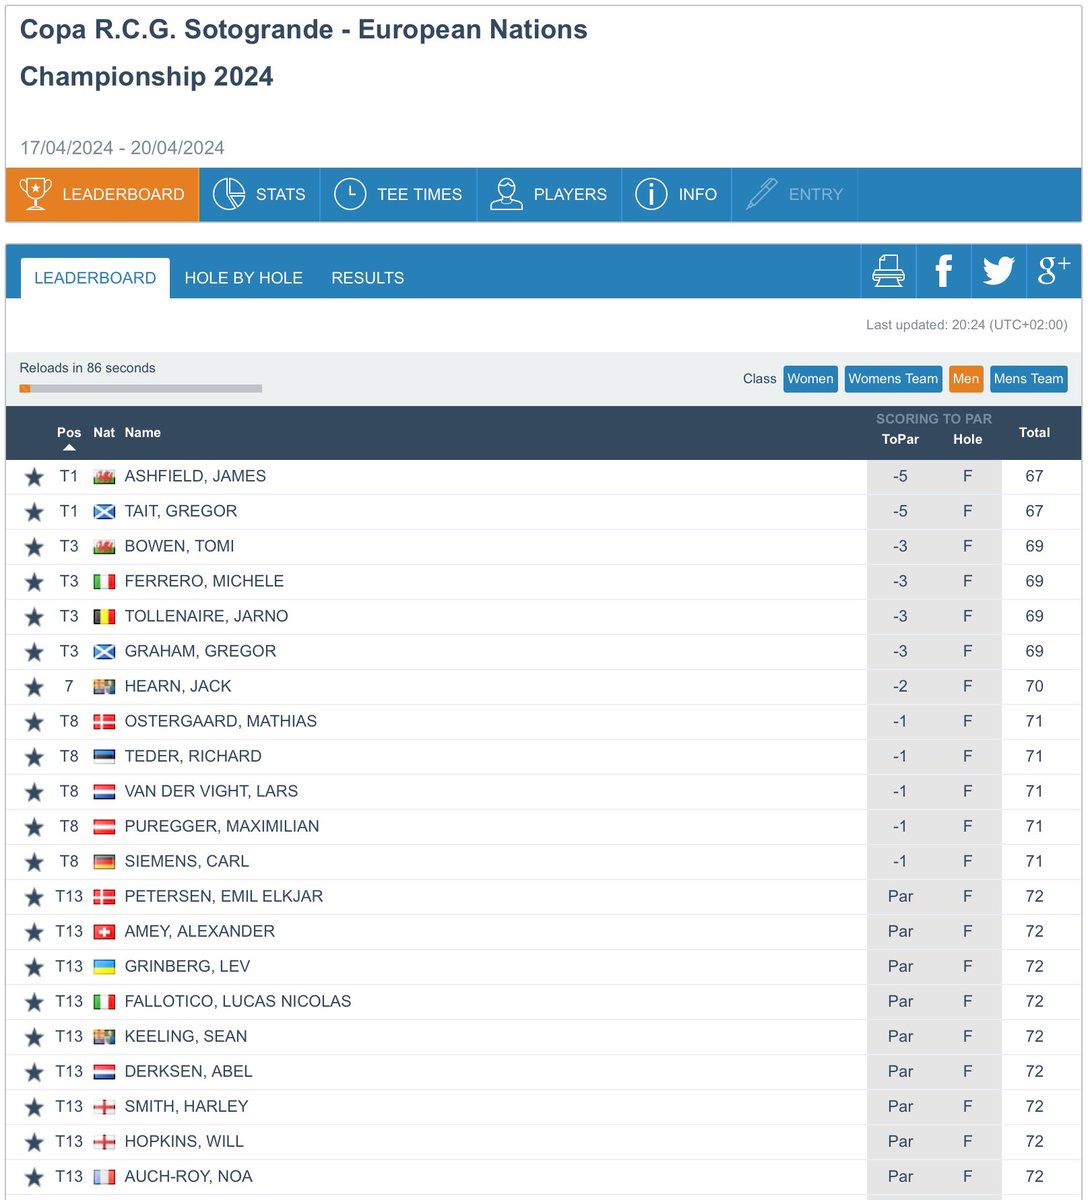 Wales (-6) are 1st, Scotland (-5) 2nd, England (+4) 5th and Ireland (+5) T6 at the Men’s European Nations Championship at RCG Sotogrande. James Ashfield & @tait_gregor (-5) and @BowenTomi & @gregorgraham03 (-3) are amongst the Individual leaders. Scores: tinyurl.com/yv99sy48